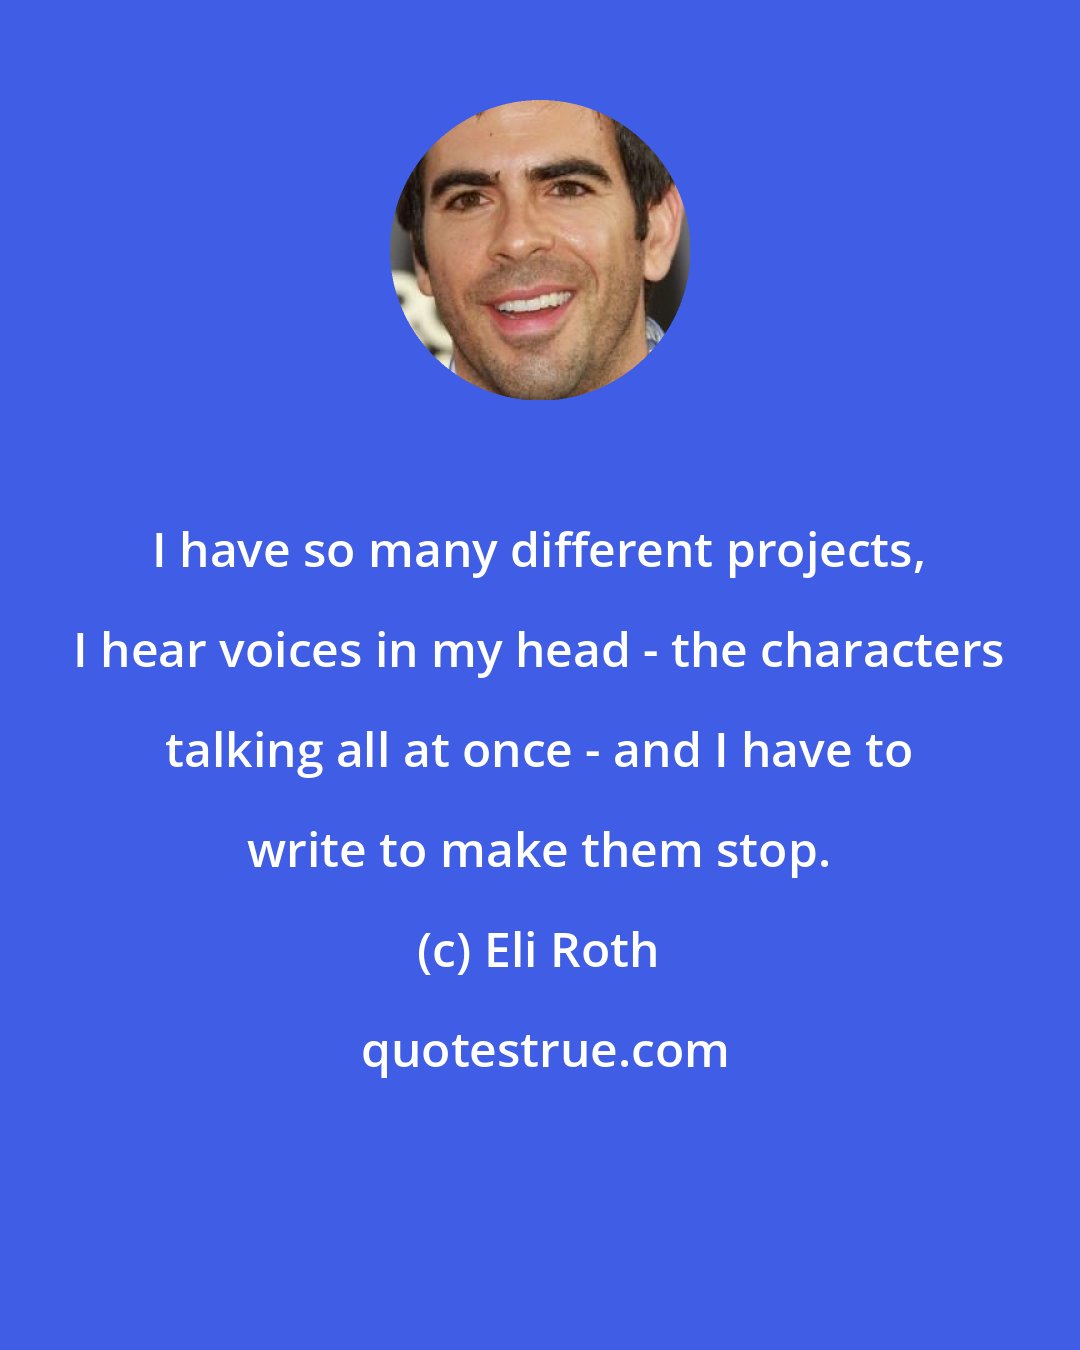 Eli Roth: I have so many different projects, I hear voices in my head - the characters talking all at once - and I have to write to make them stop.